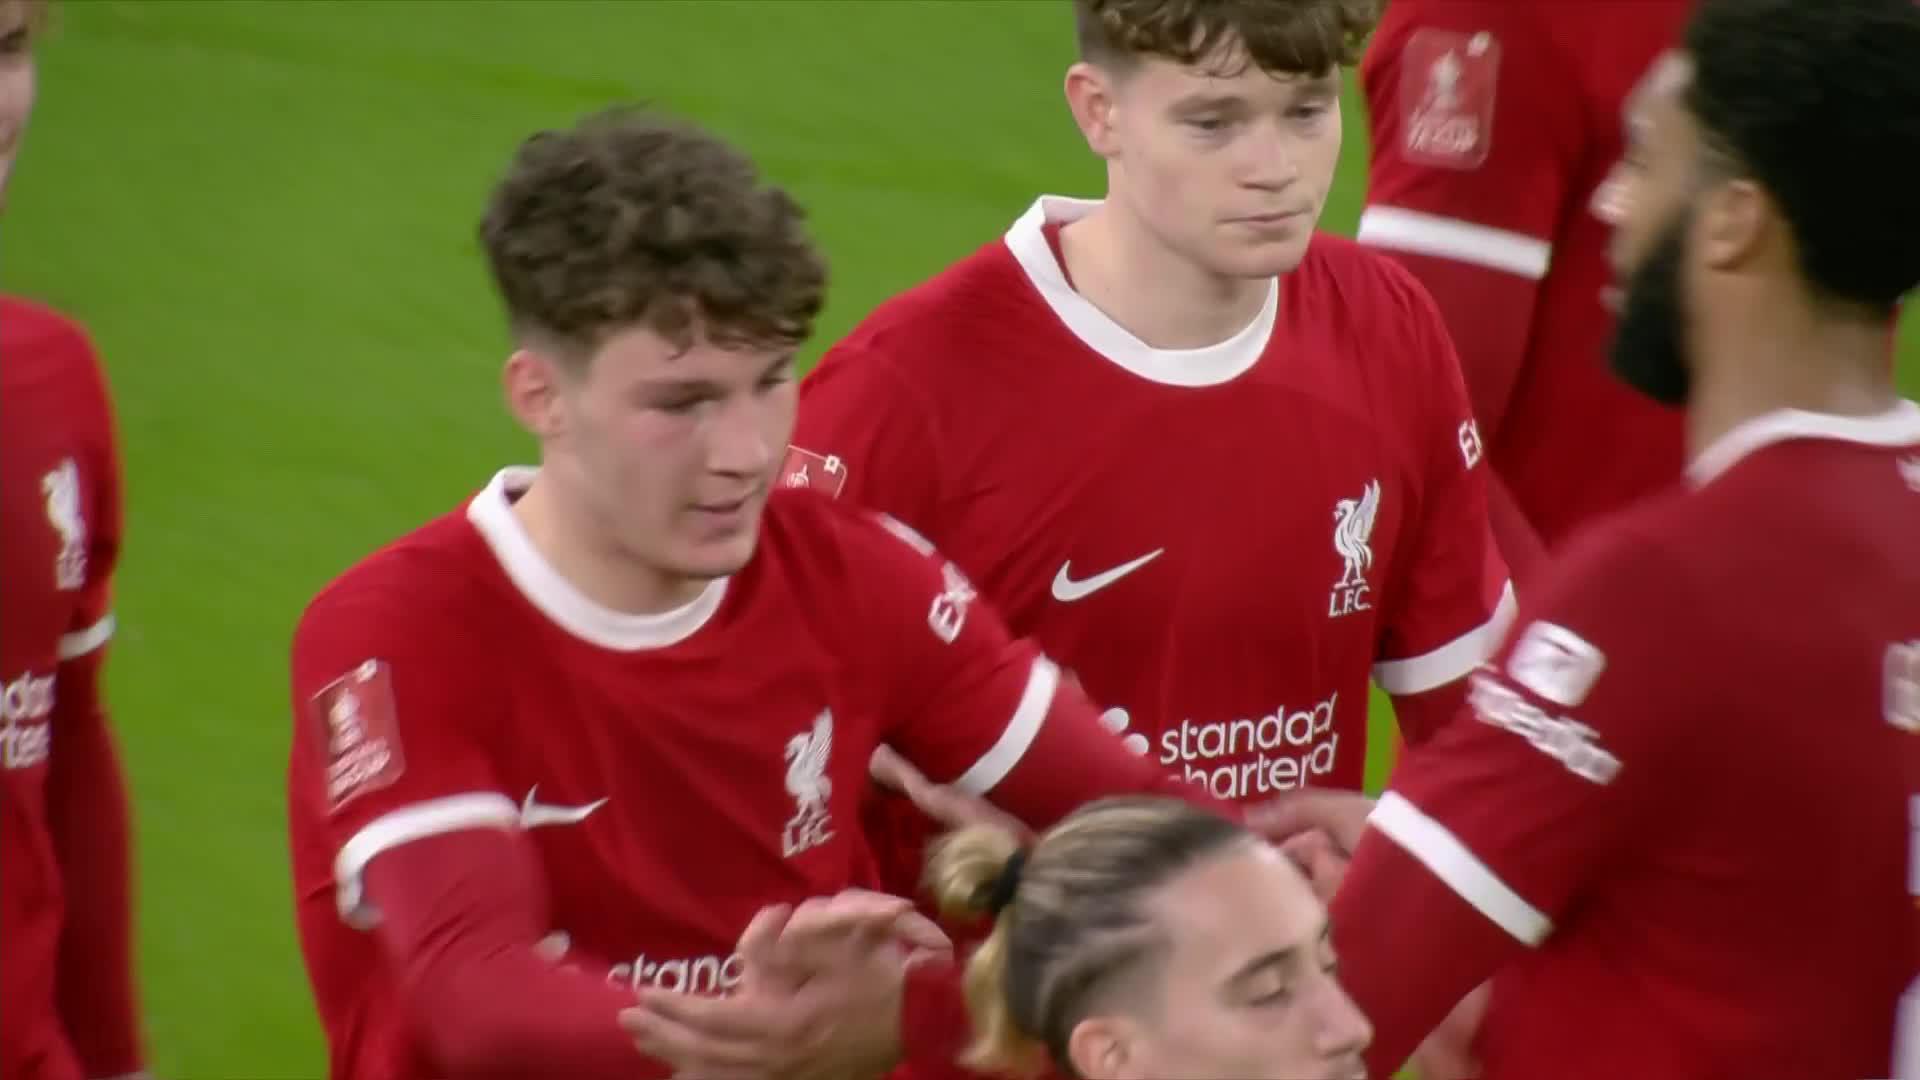 A first professional goal for Lewis Koumas ♥️A terrific reverse finish from the @LFC youngster 👌#EmiratesFACup